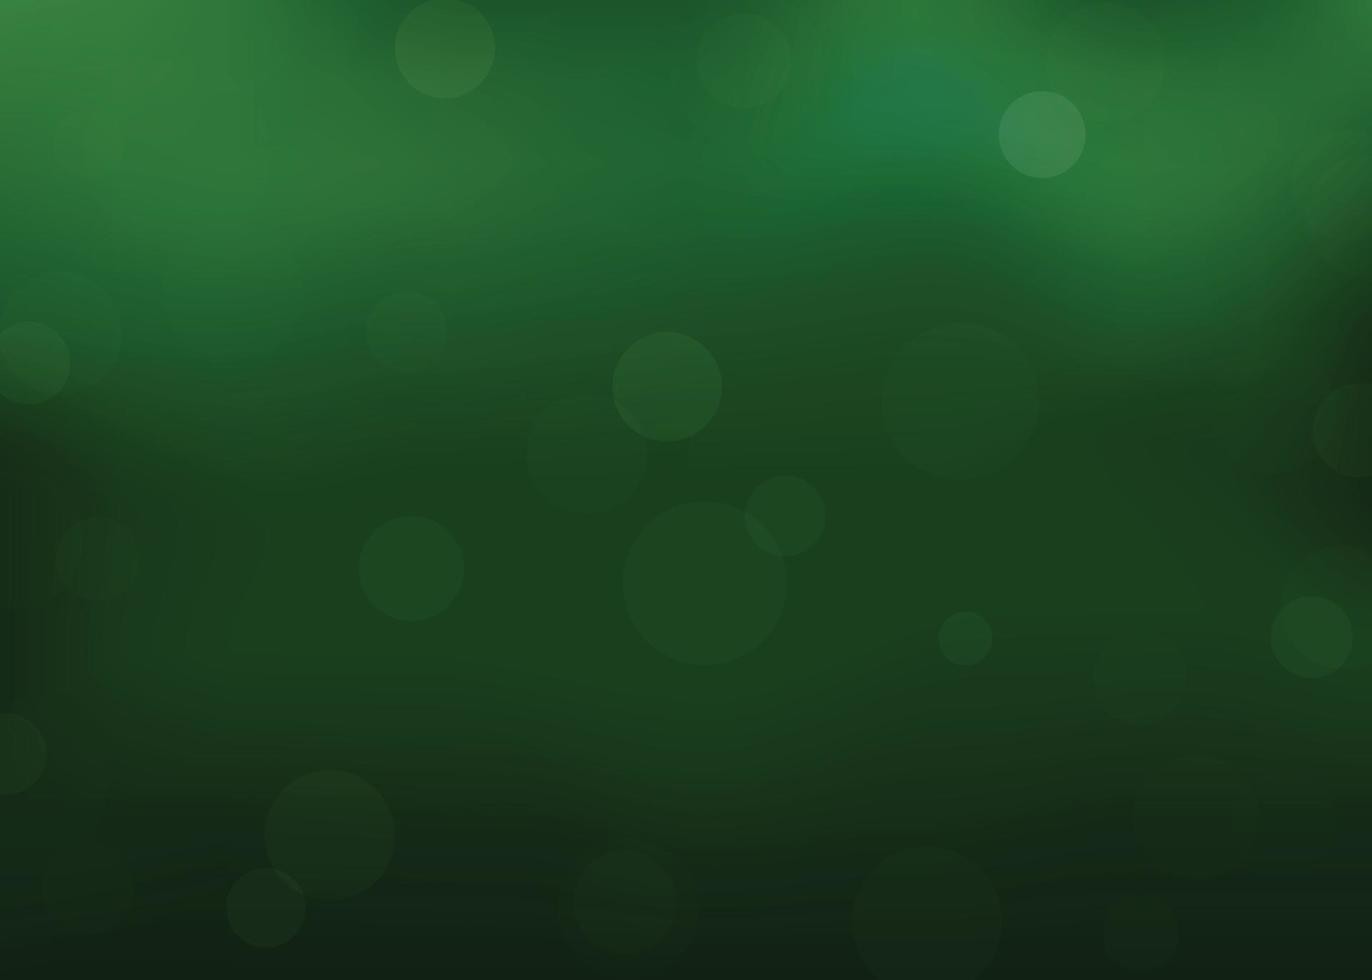 Green blurred bright background Template for your design vector